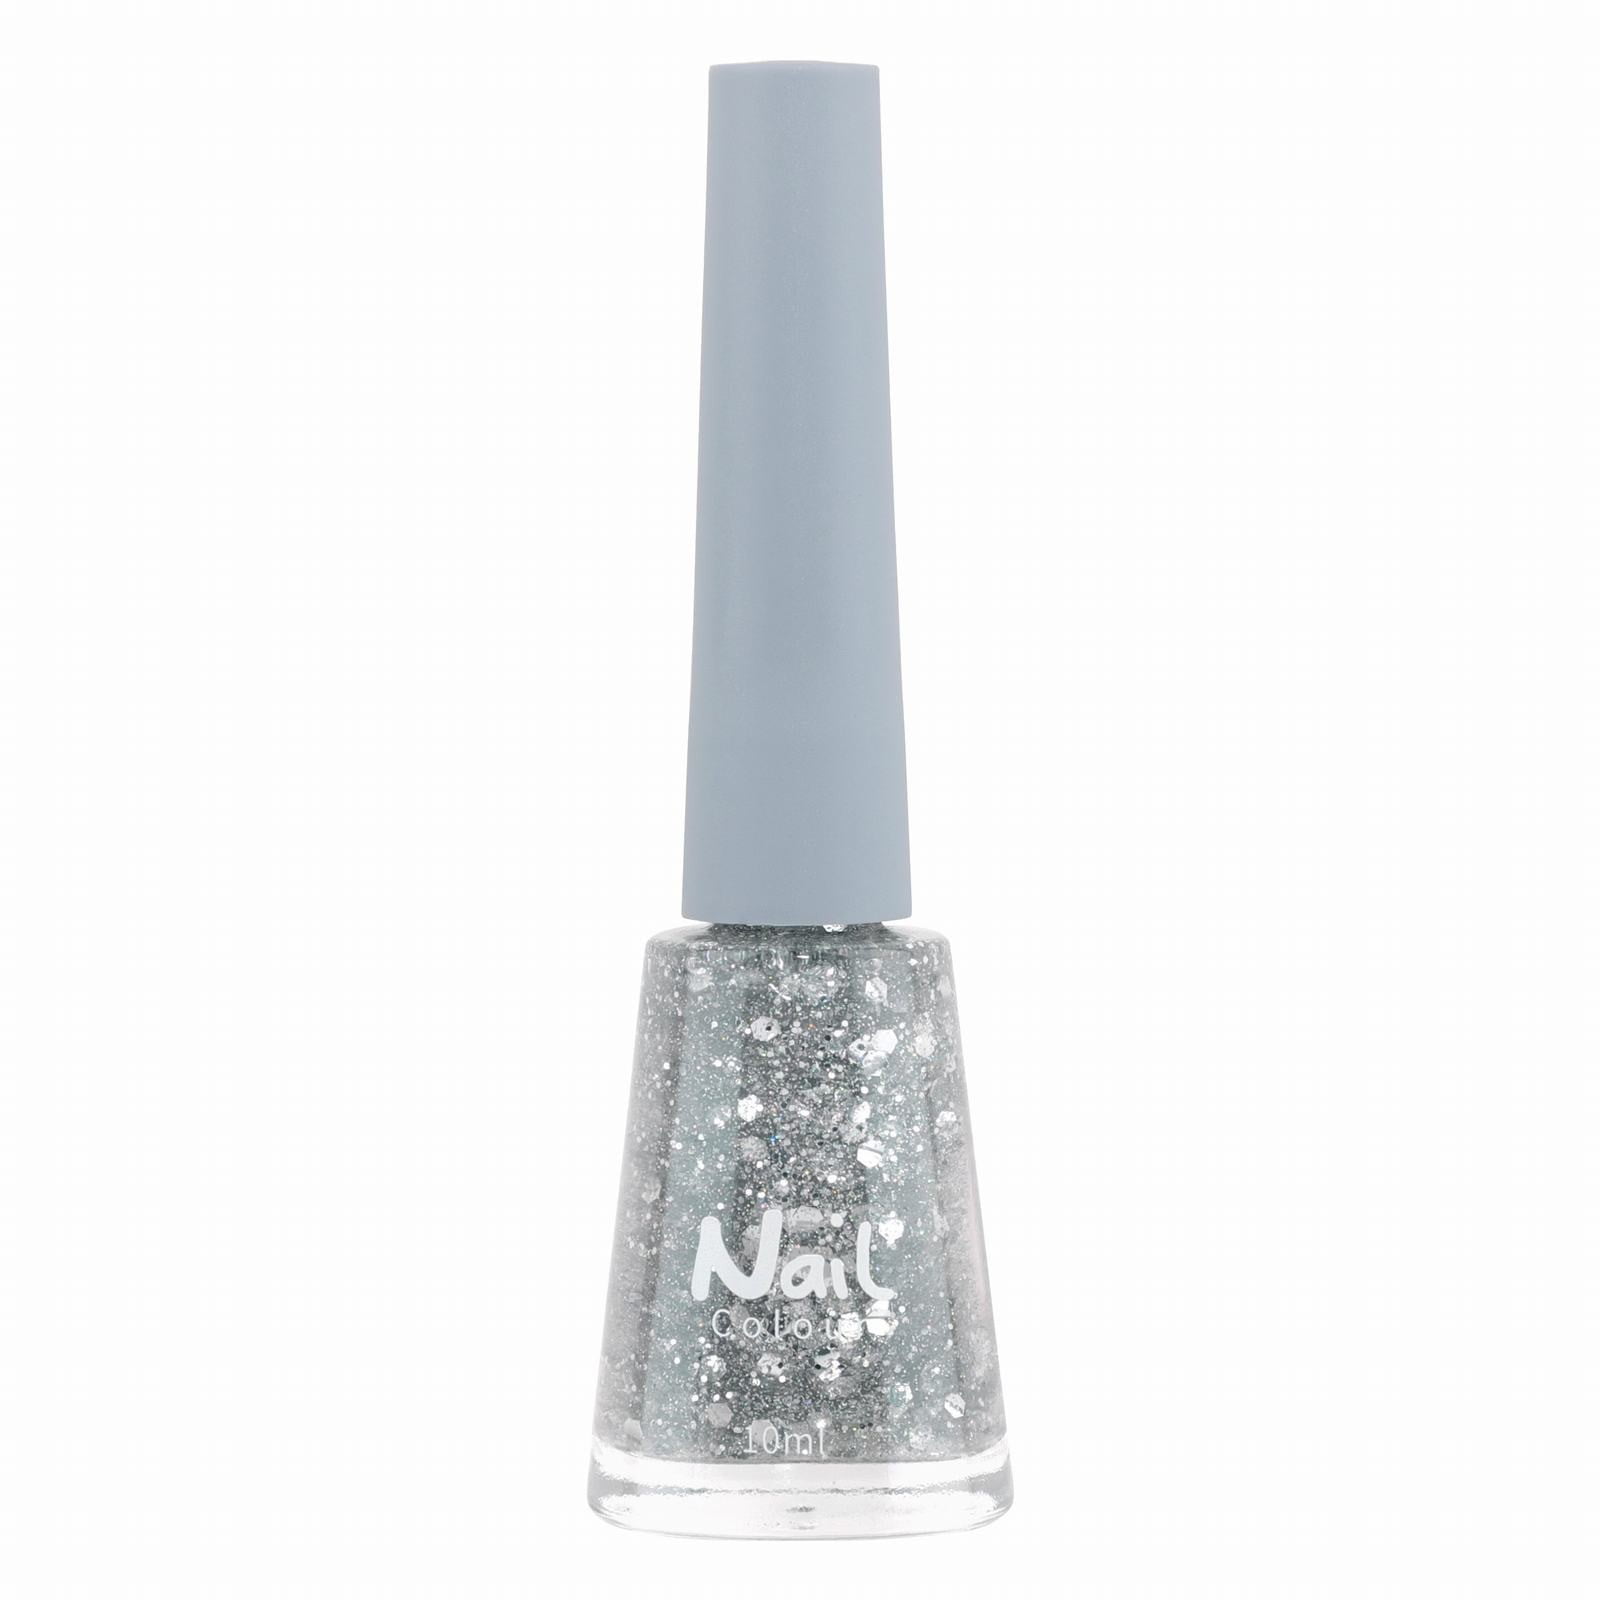 Buy Avon Color Me Pretty Nail Enamel - (glitter gold-sizzling  silver-champagne shimmer) - 5 ml each Online at Low Prices in India -  Amazon.in